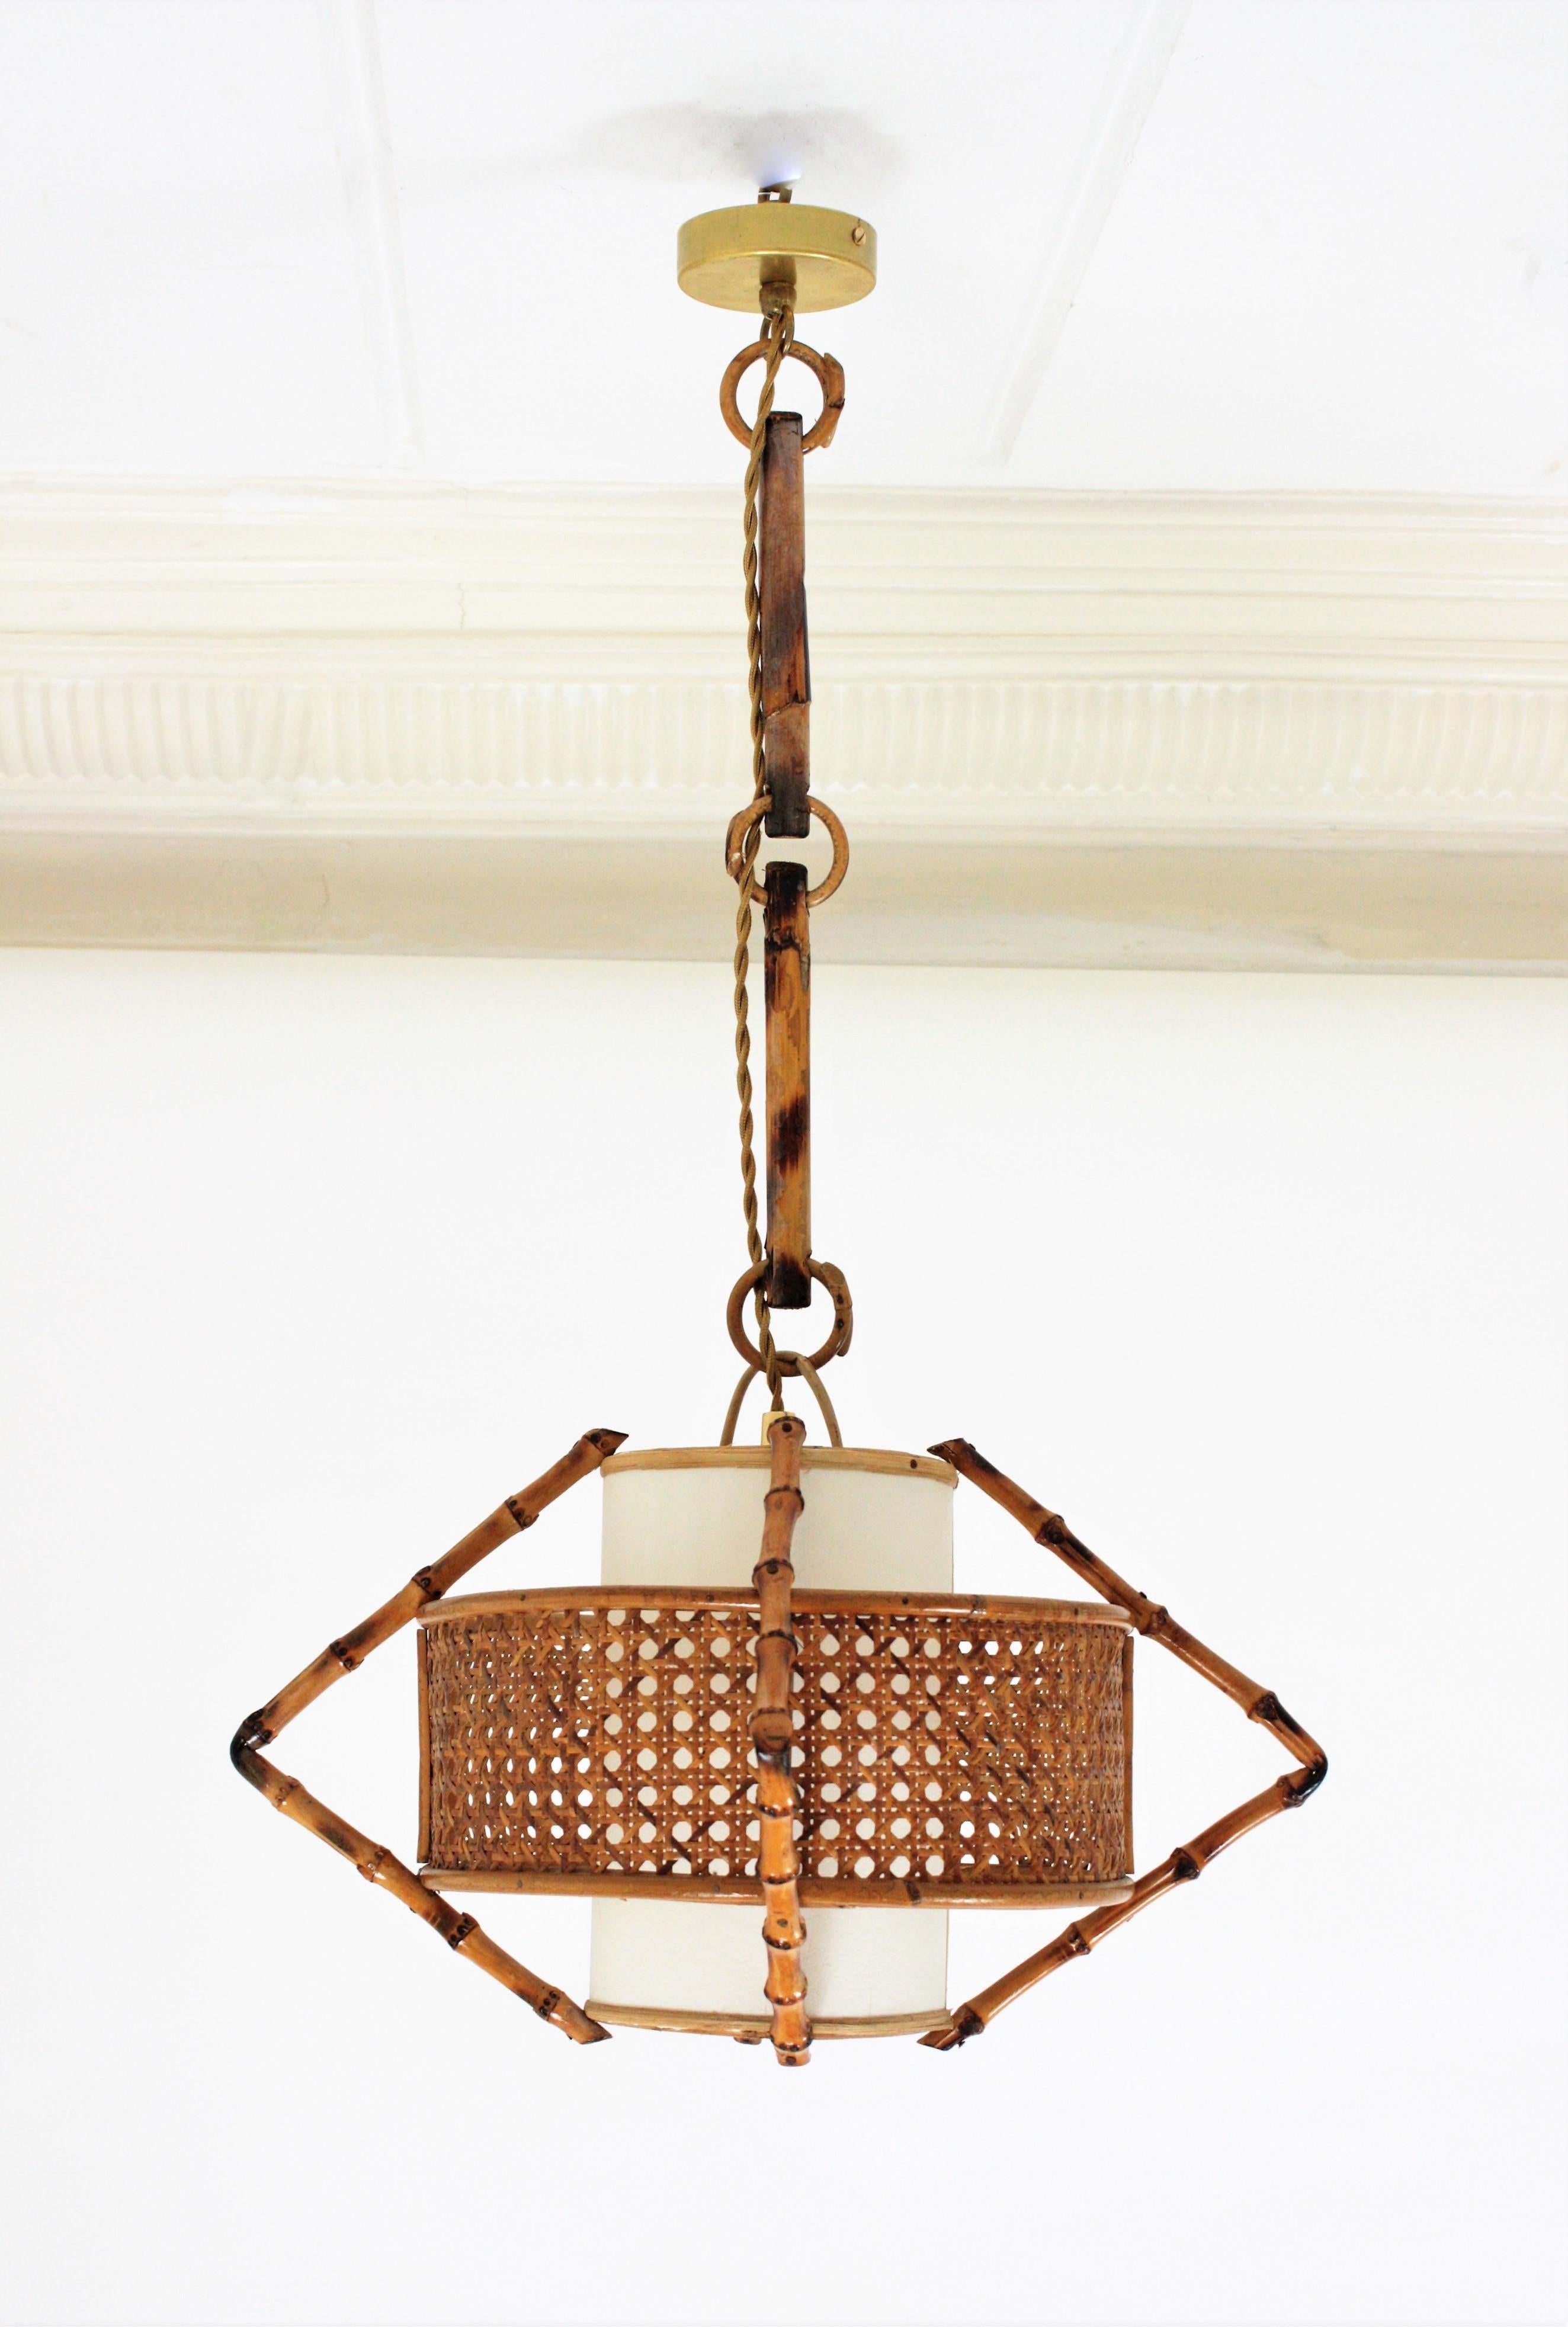 Unusual handcrafted bamboo and rattan hanging pendant lamp with a woven wicker shade. Manufactured at the Mid-Century Modern period with Tiki or oriental accents, Spain, 1950s.
This sculptural lamp combines a midcentury taste at the woven wicker